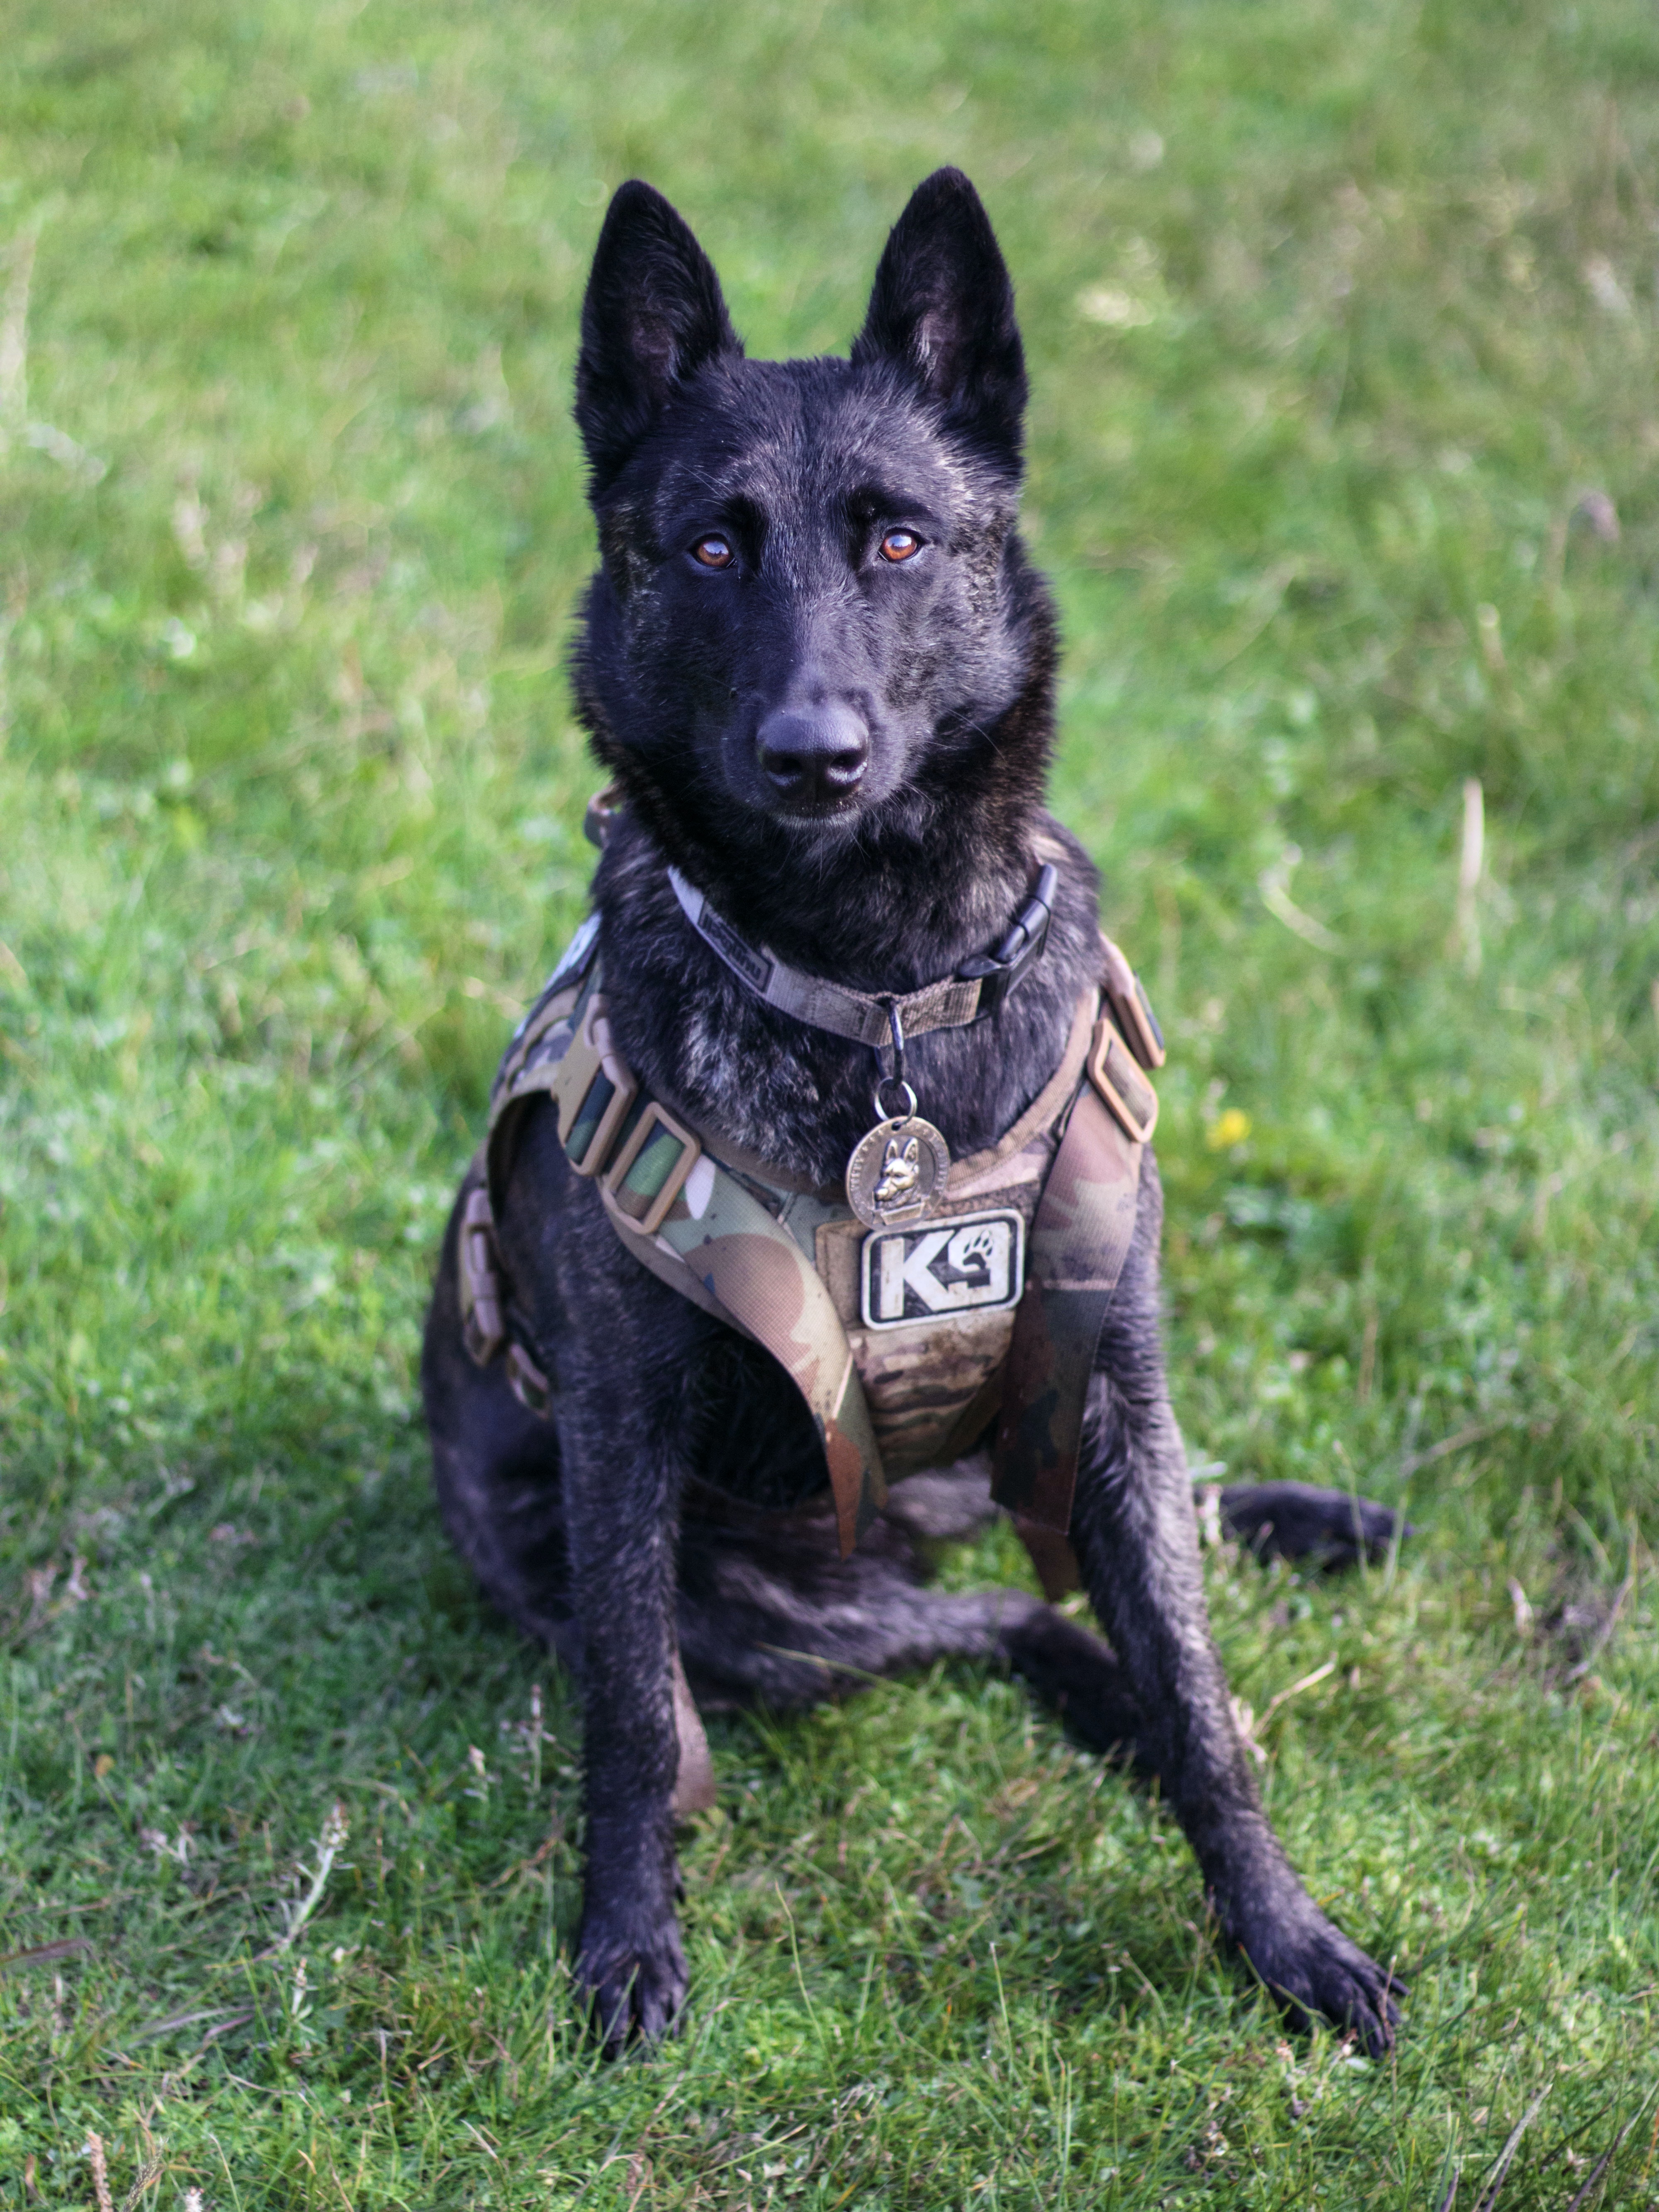 A K9 police dog sitting on grass, wearing a service vest, potentially illustrating law enforcement themes in the context of the legal case Rodriguez v. United States.